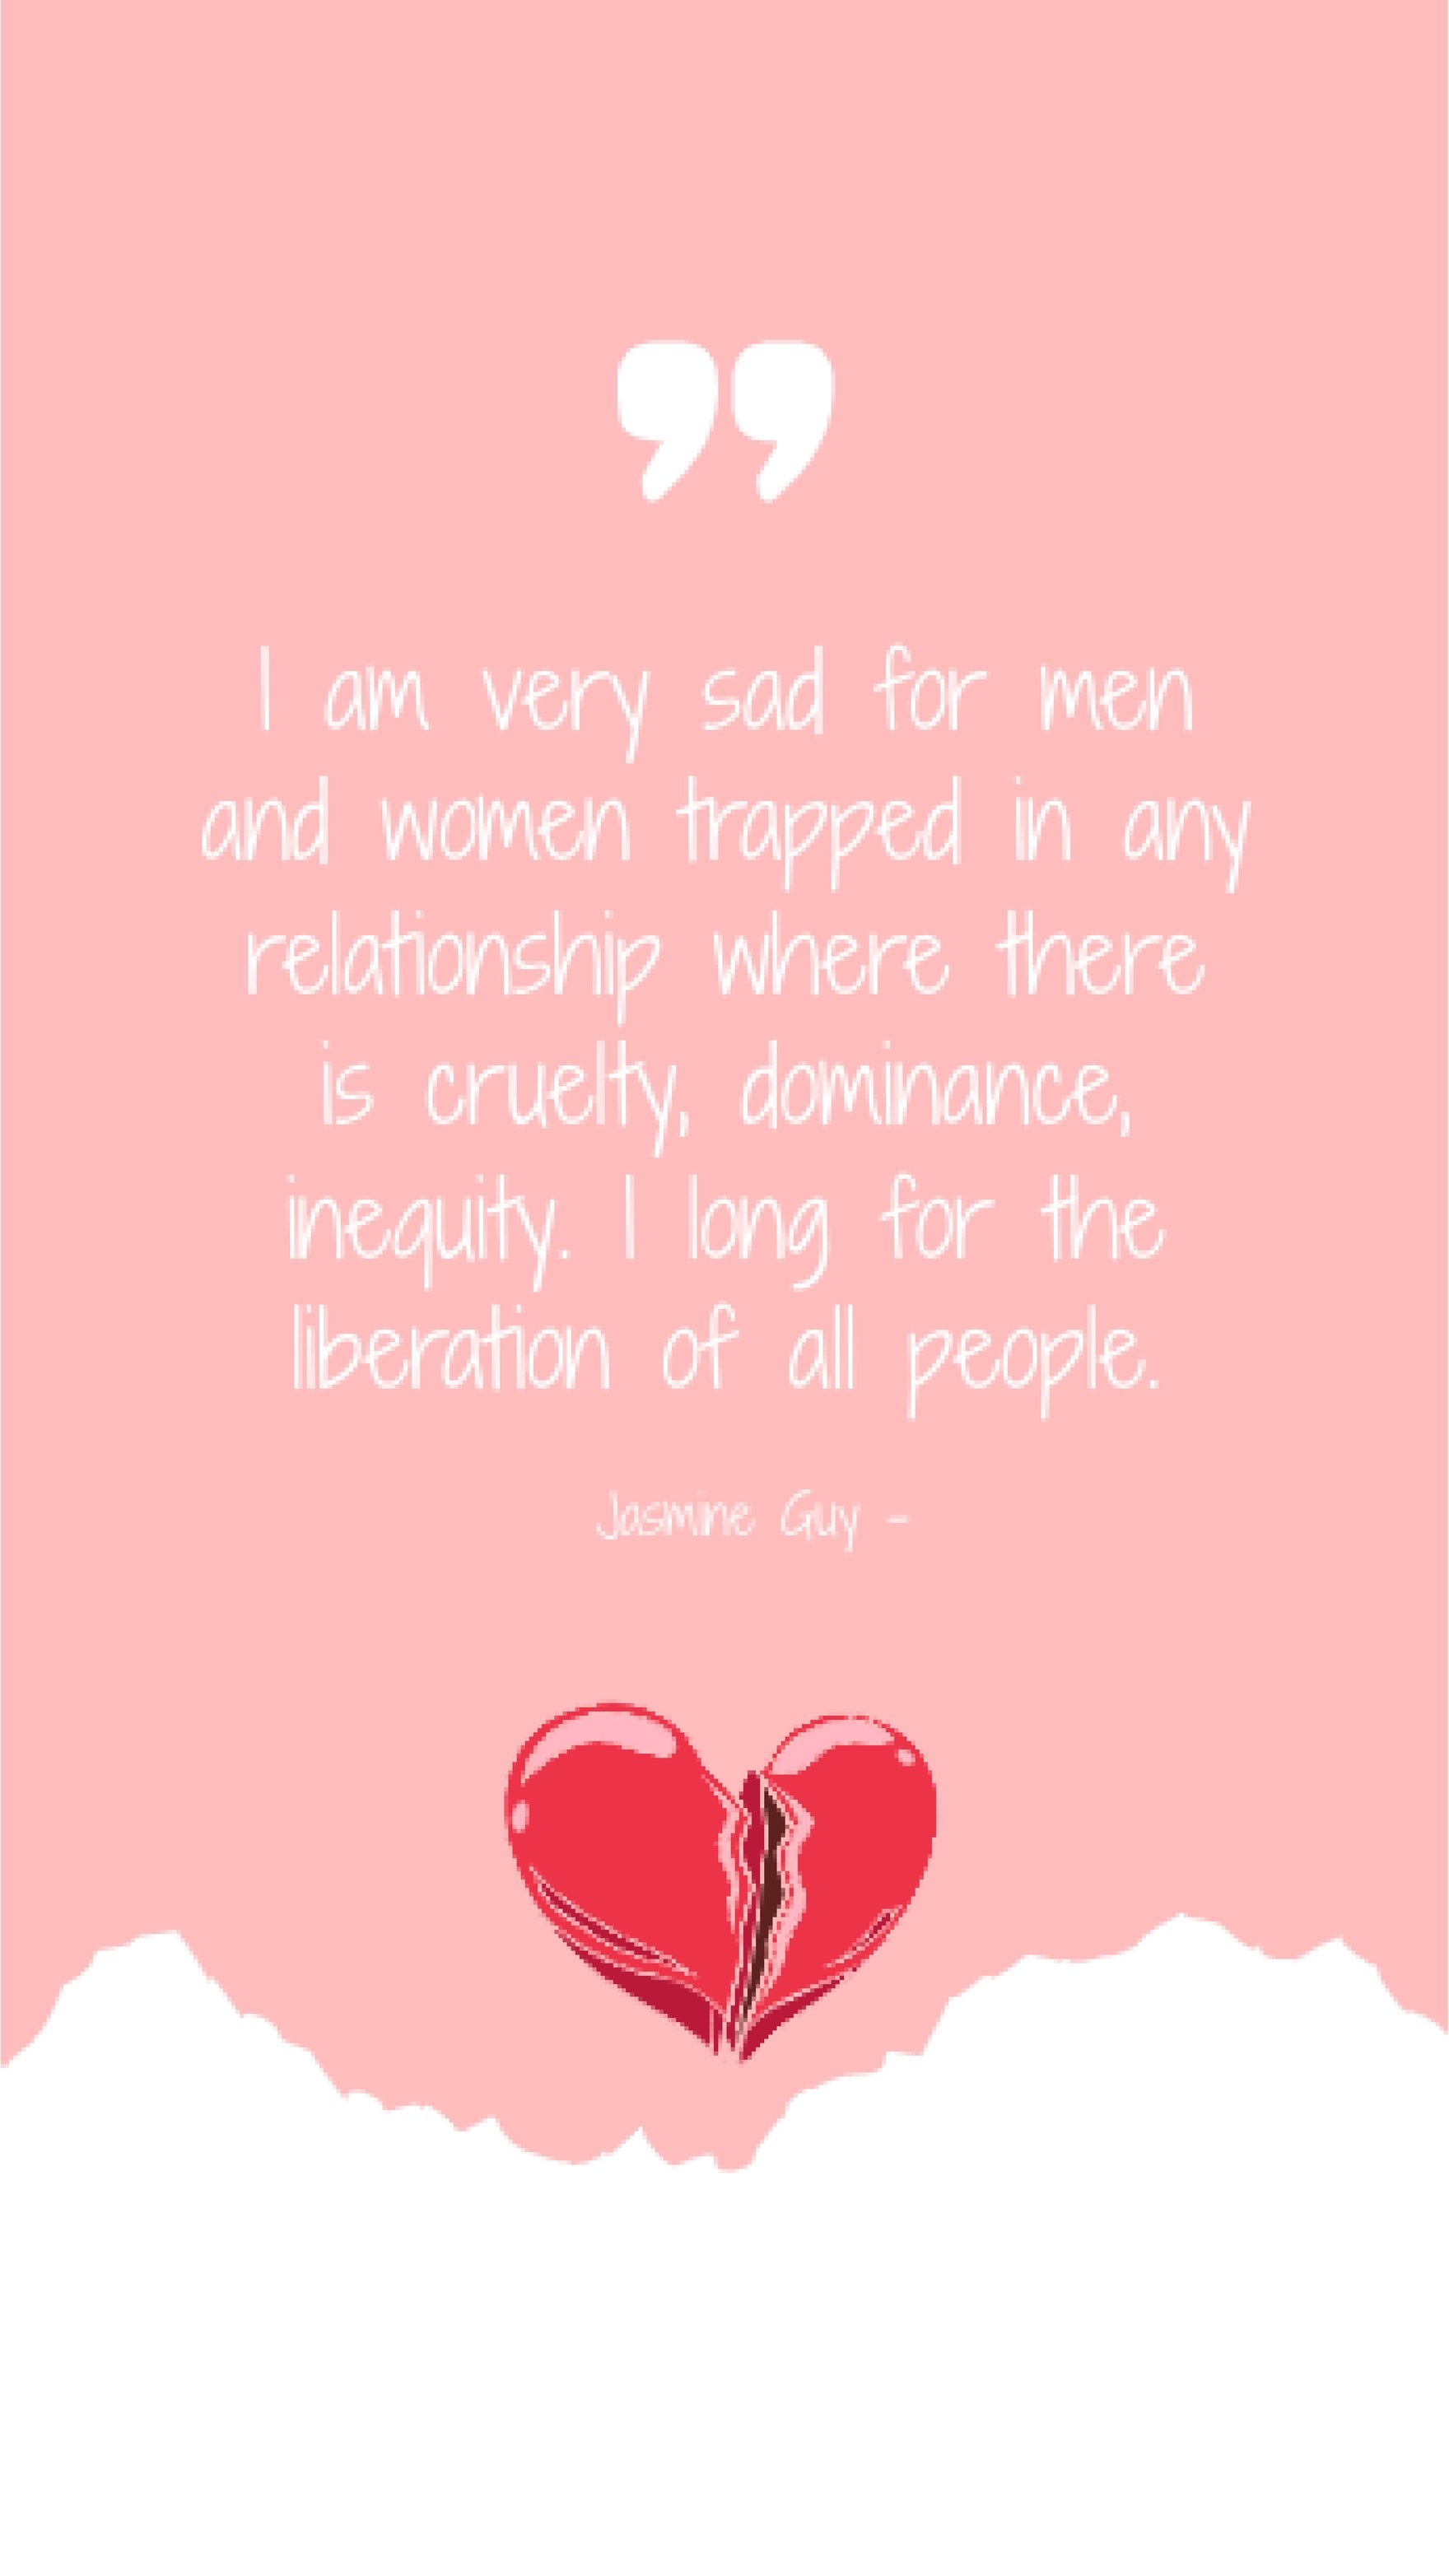 Jasmine Guy - I am very sad for men and women trapped in any relationship where there is cruelty, dominance, inequity. I long for the liberation of all people. Template